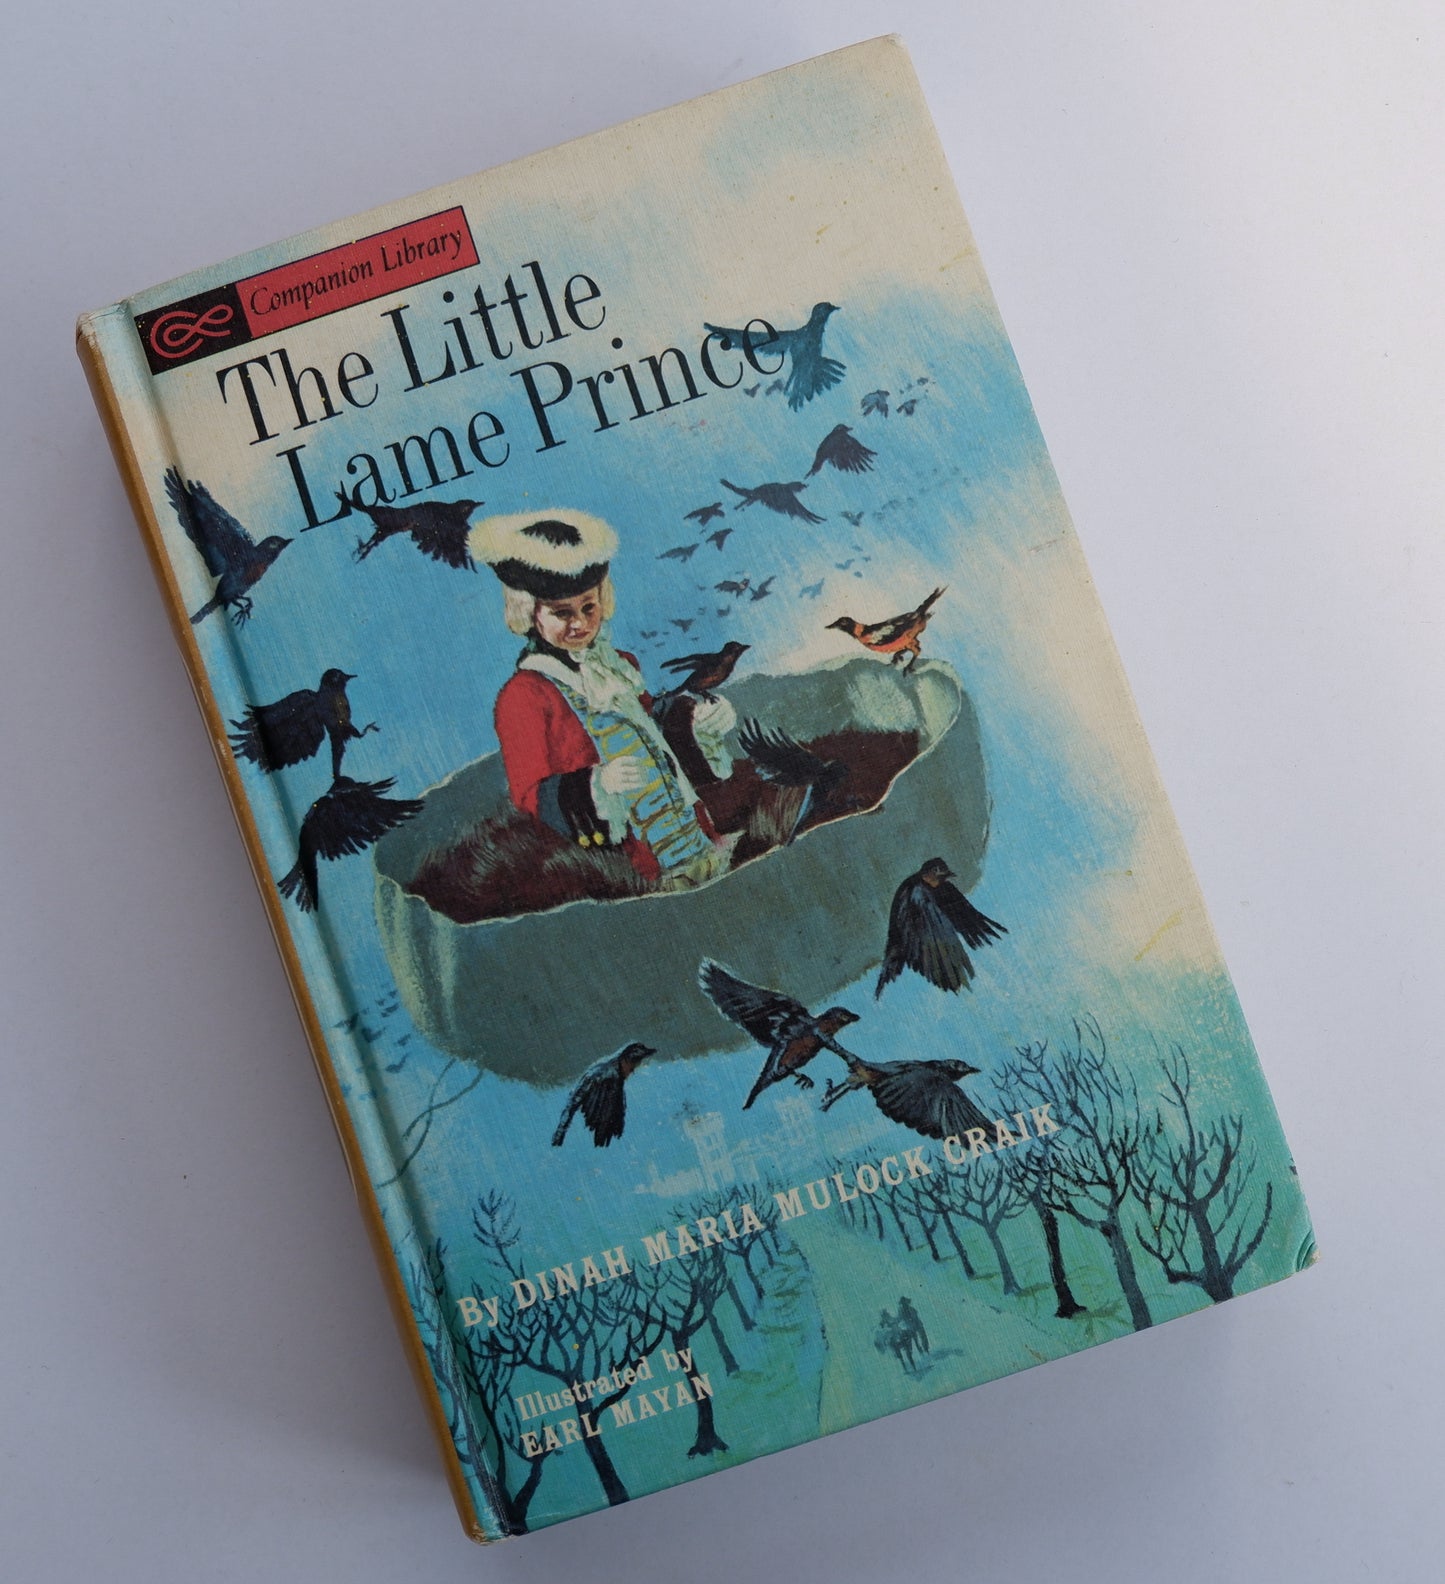 The Merry Adventure of Robin Hood/The Little Lame Prince - Companion Library